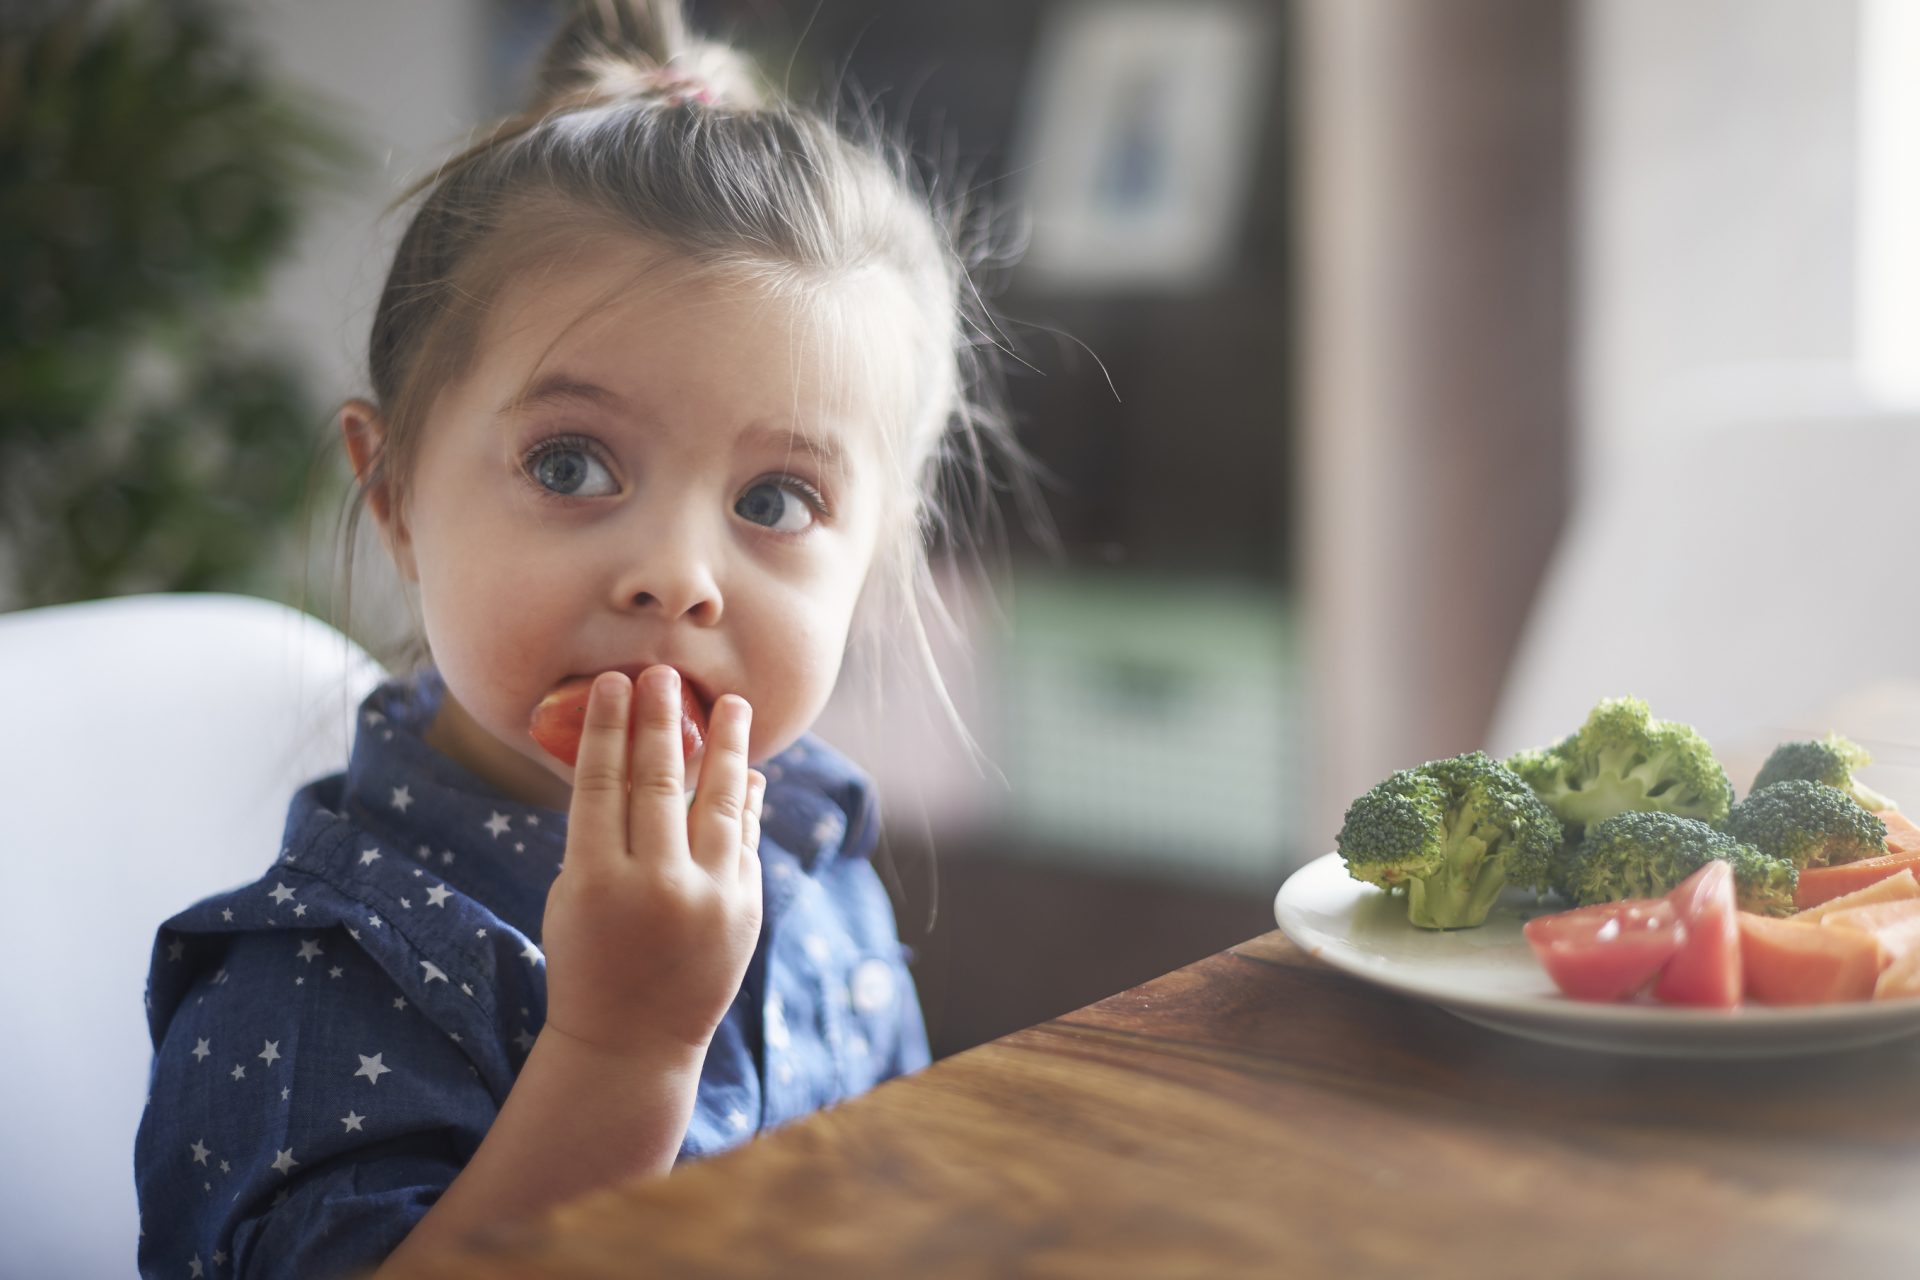 Children begin to mimic their parents’ food choices at a very young age.